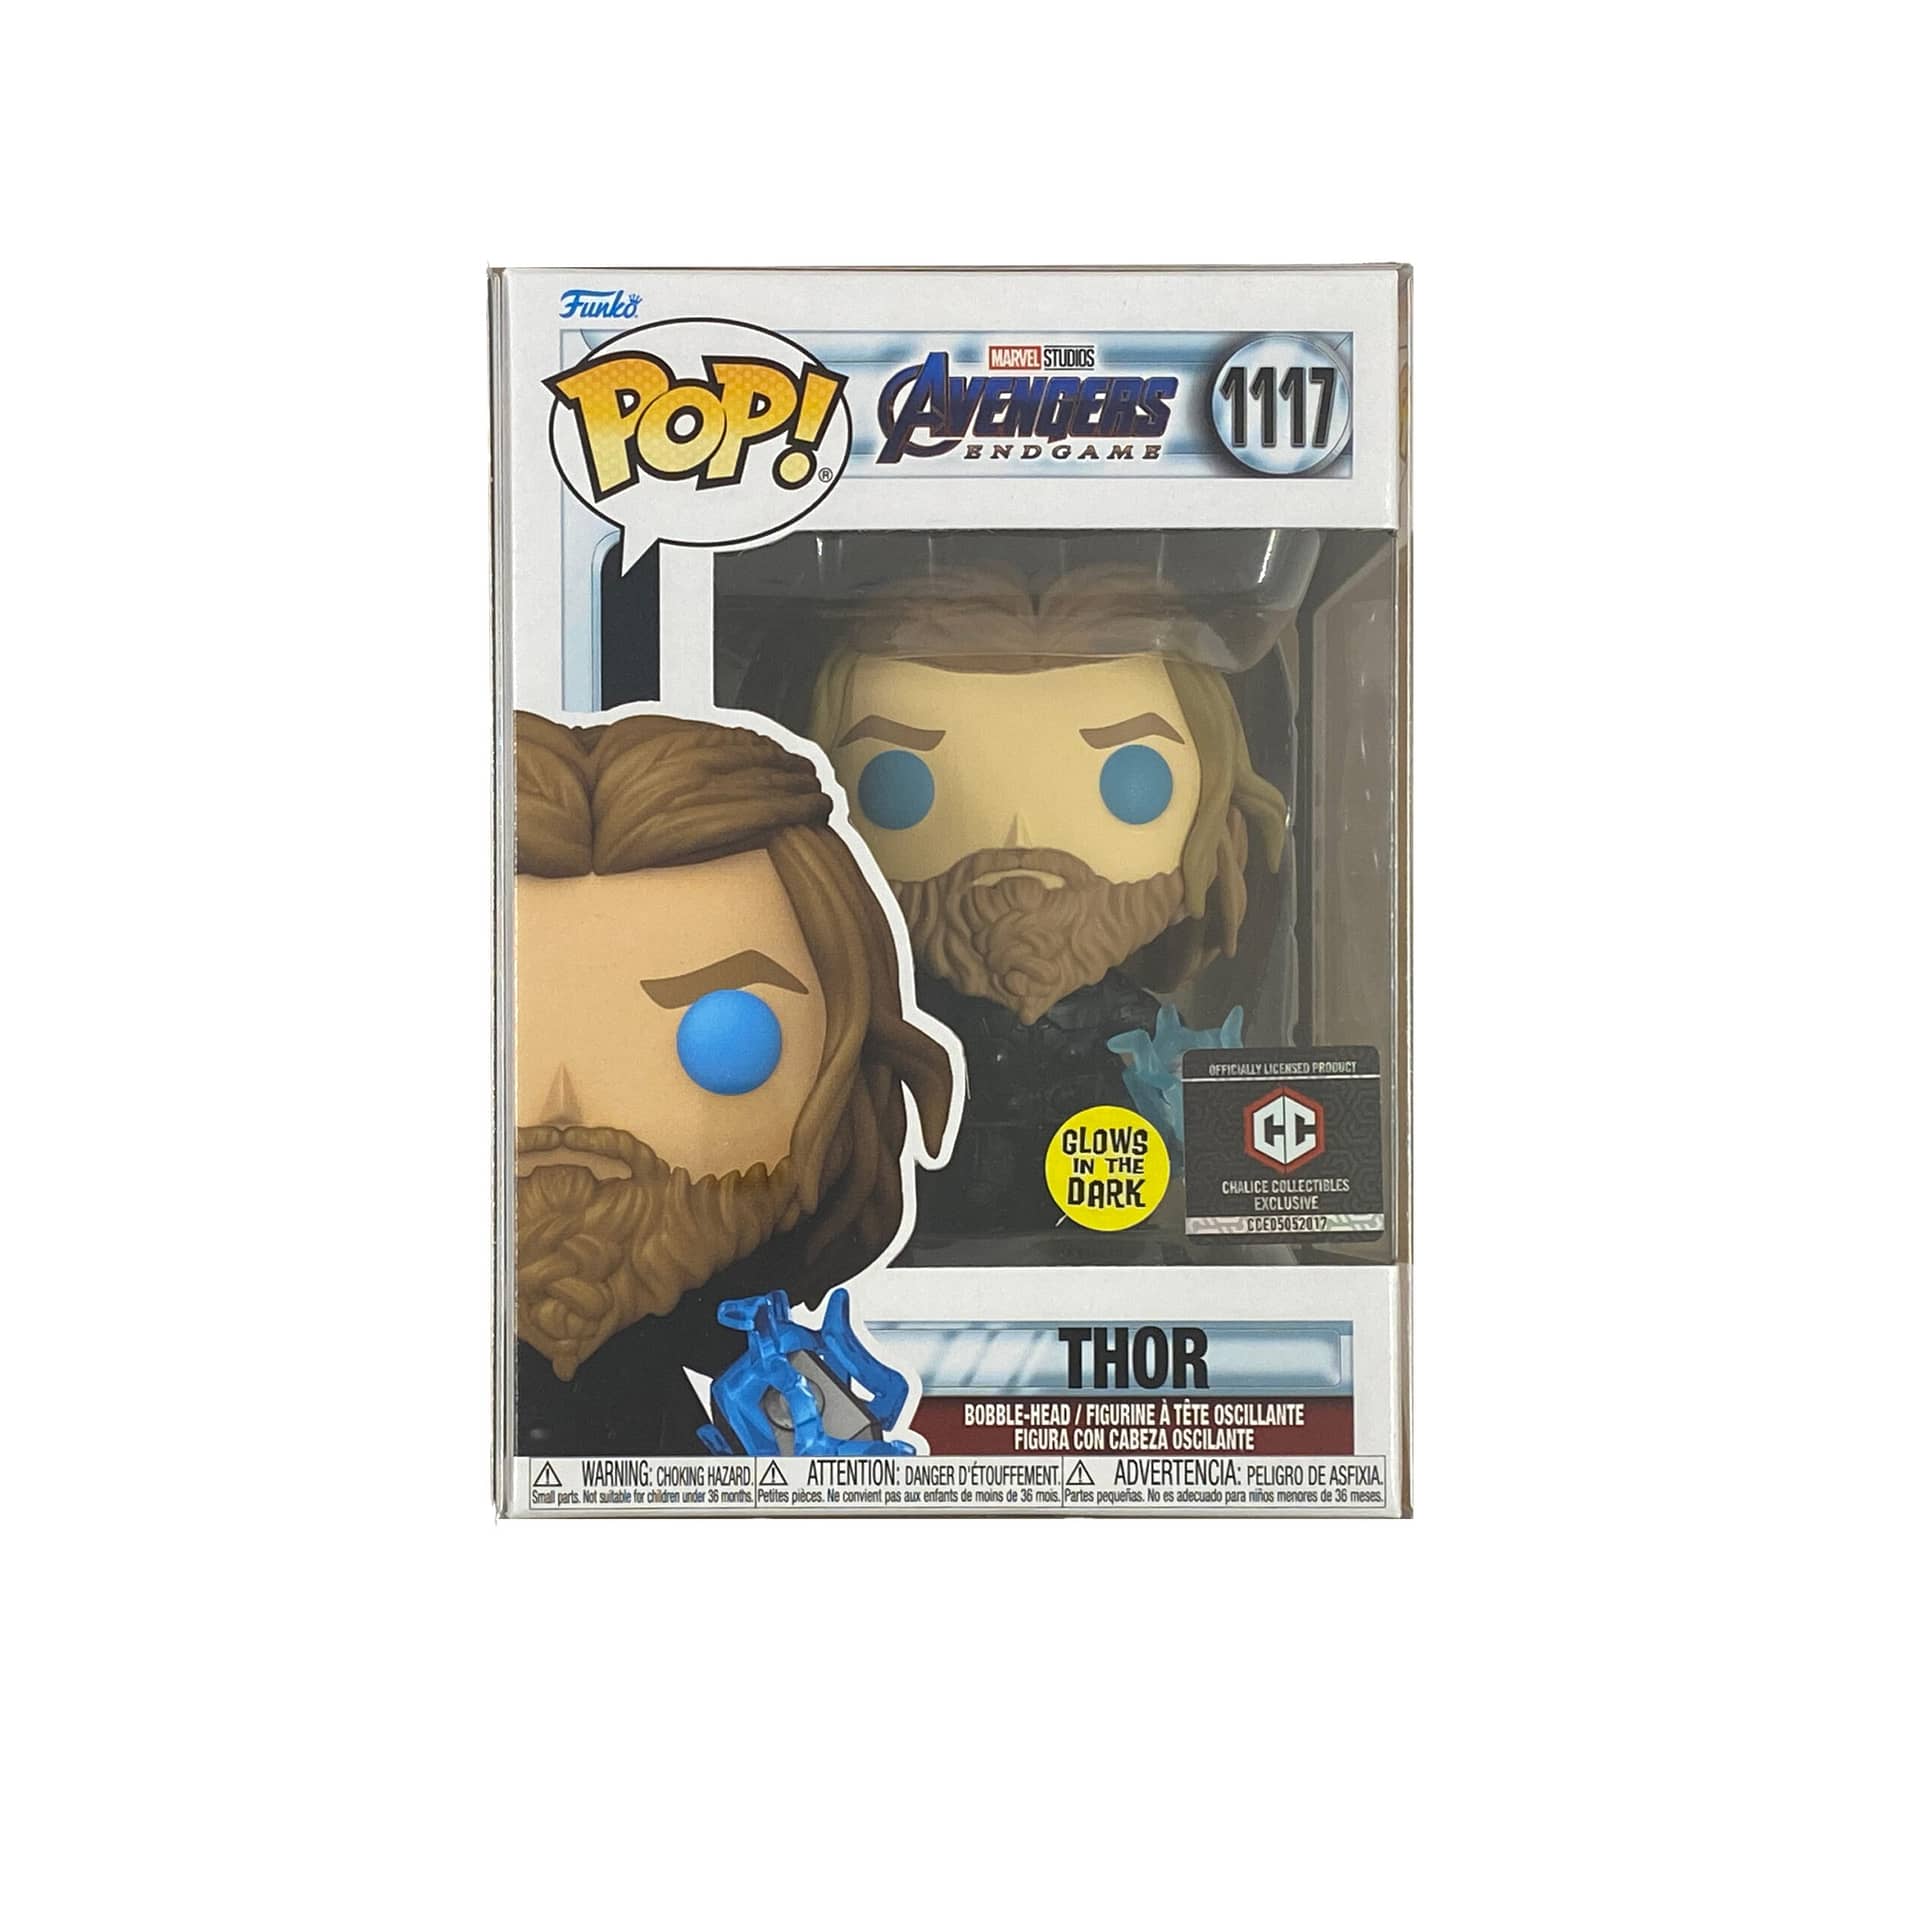 Merg Parana rivier Oswald Funko Pop! Avengers Endgame Thor with Thunder Glows in the Dark Chalice  Exclusive Figure #1117 - Legacy Comics and Cards | Trading Card Games,  Comic Books, and More!